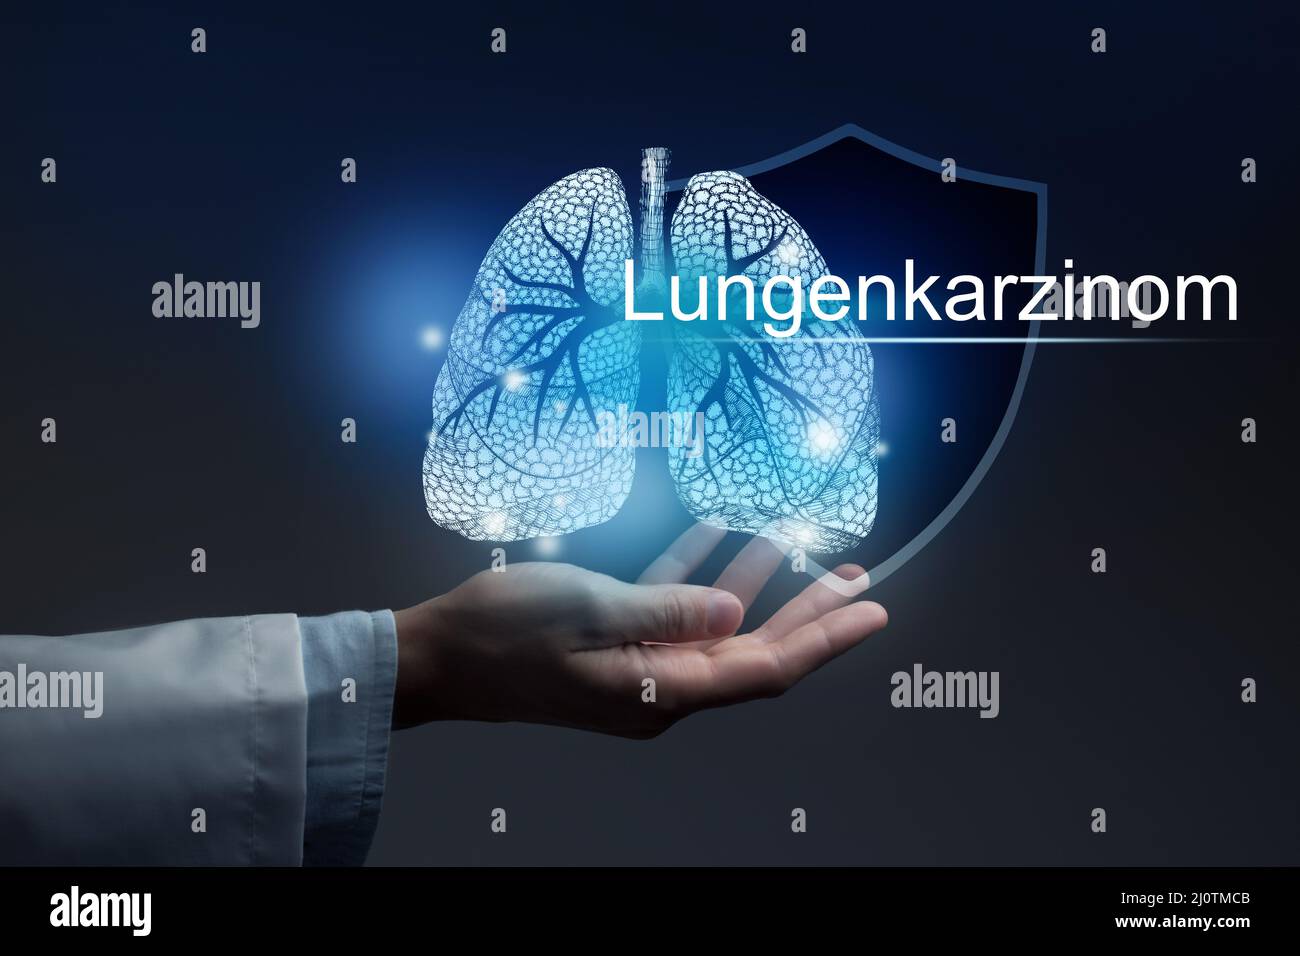 Medical banner Carcinoma with german translation Lungenkarzinom on blue background with  large copy space for text or checklist. Stock Photo